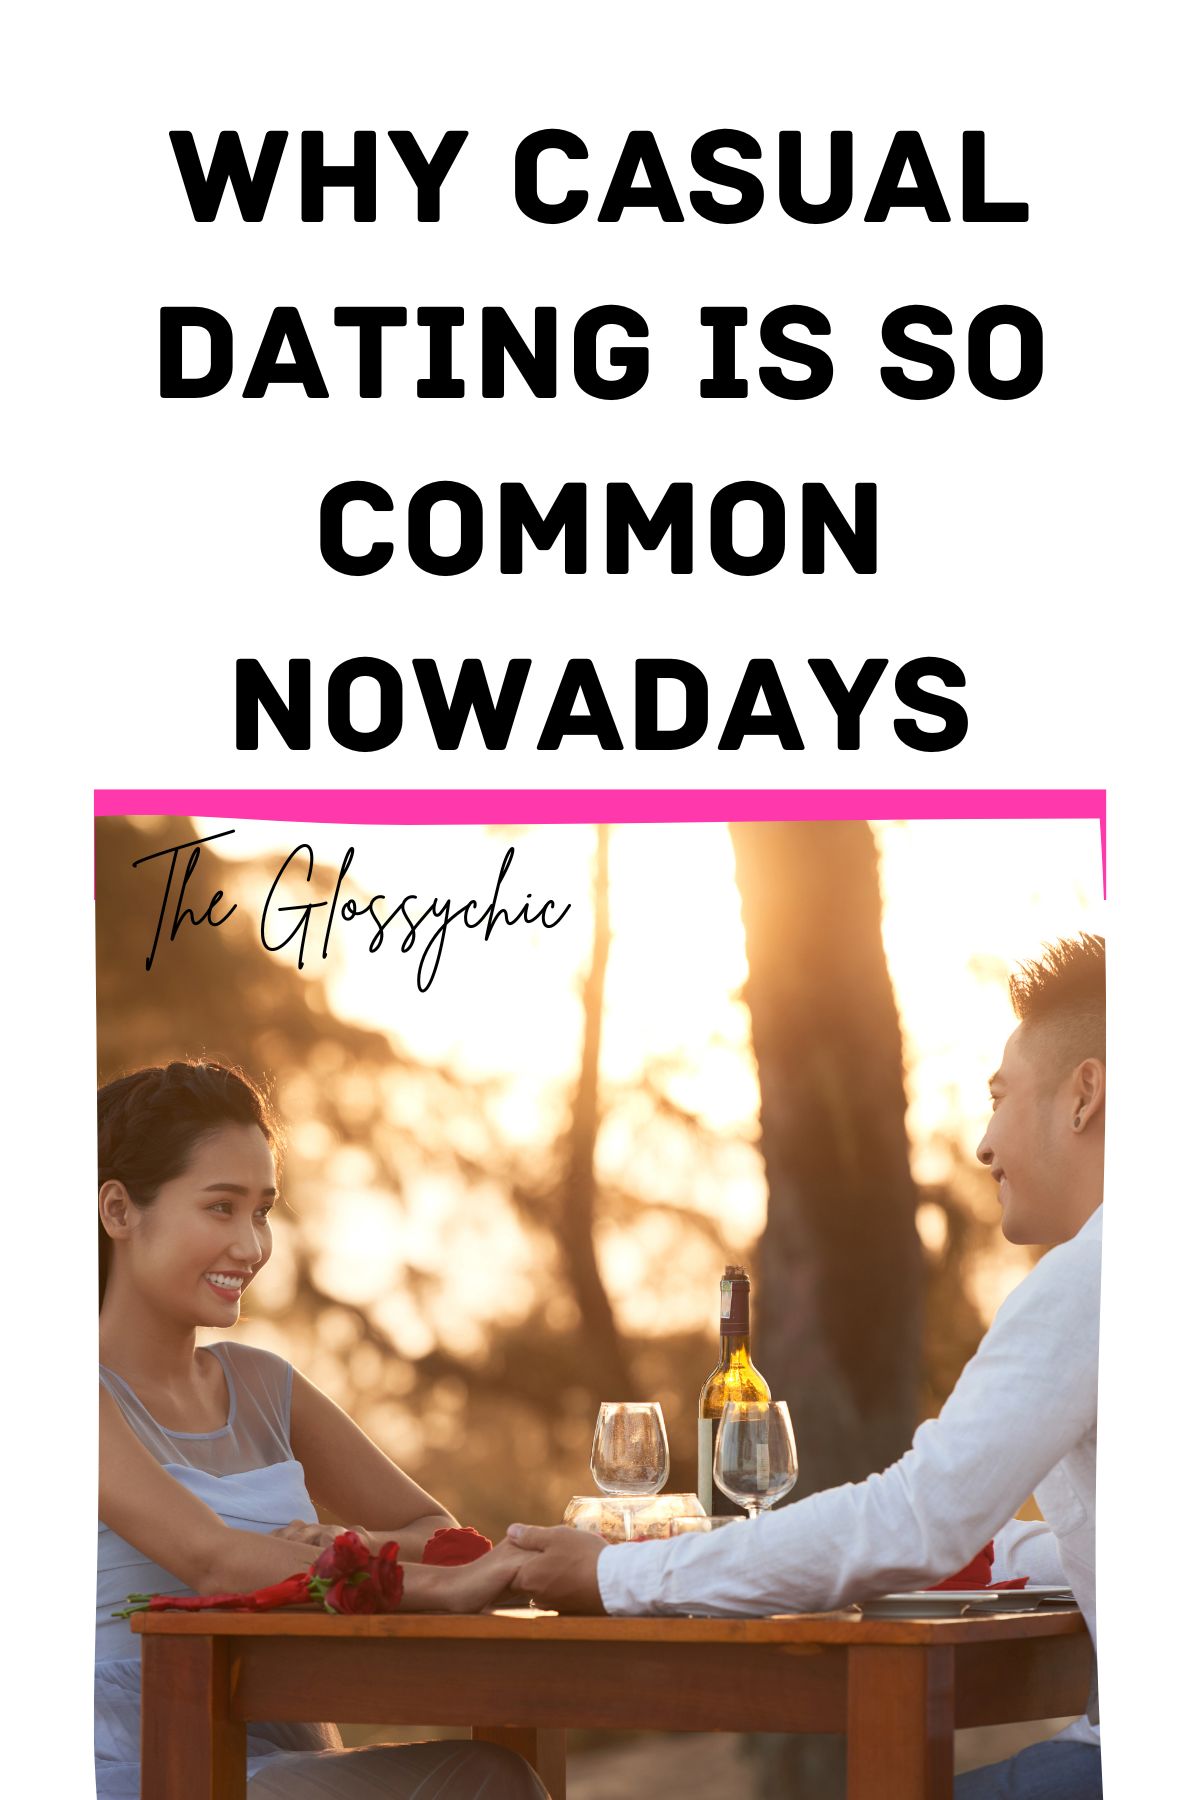 Why Casual Dating Is So Common Nowadays